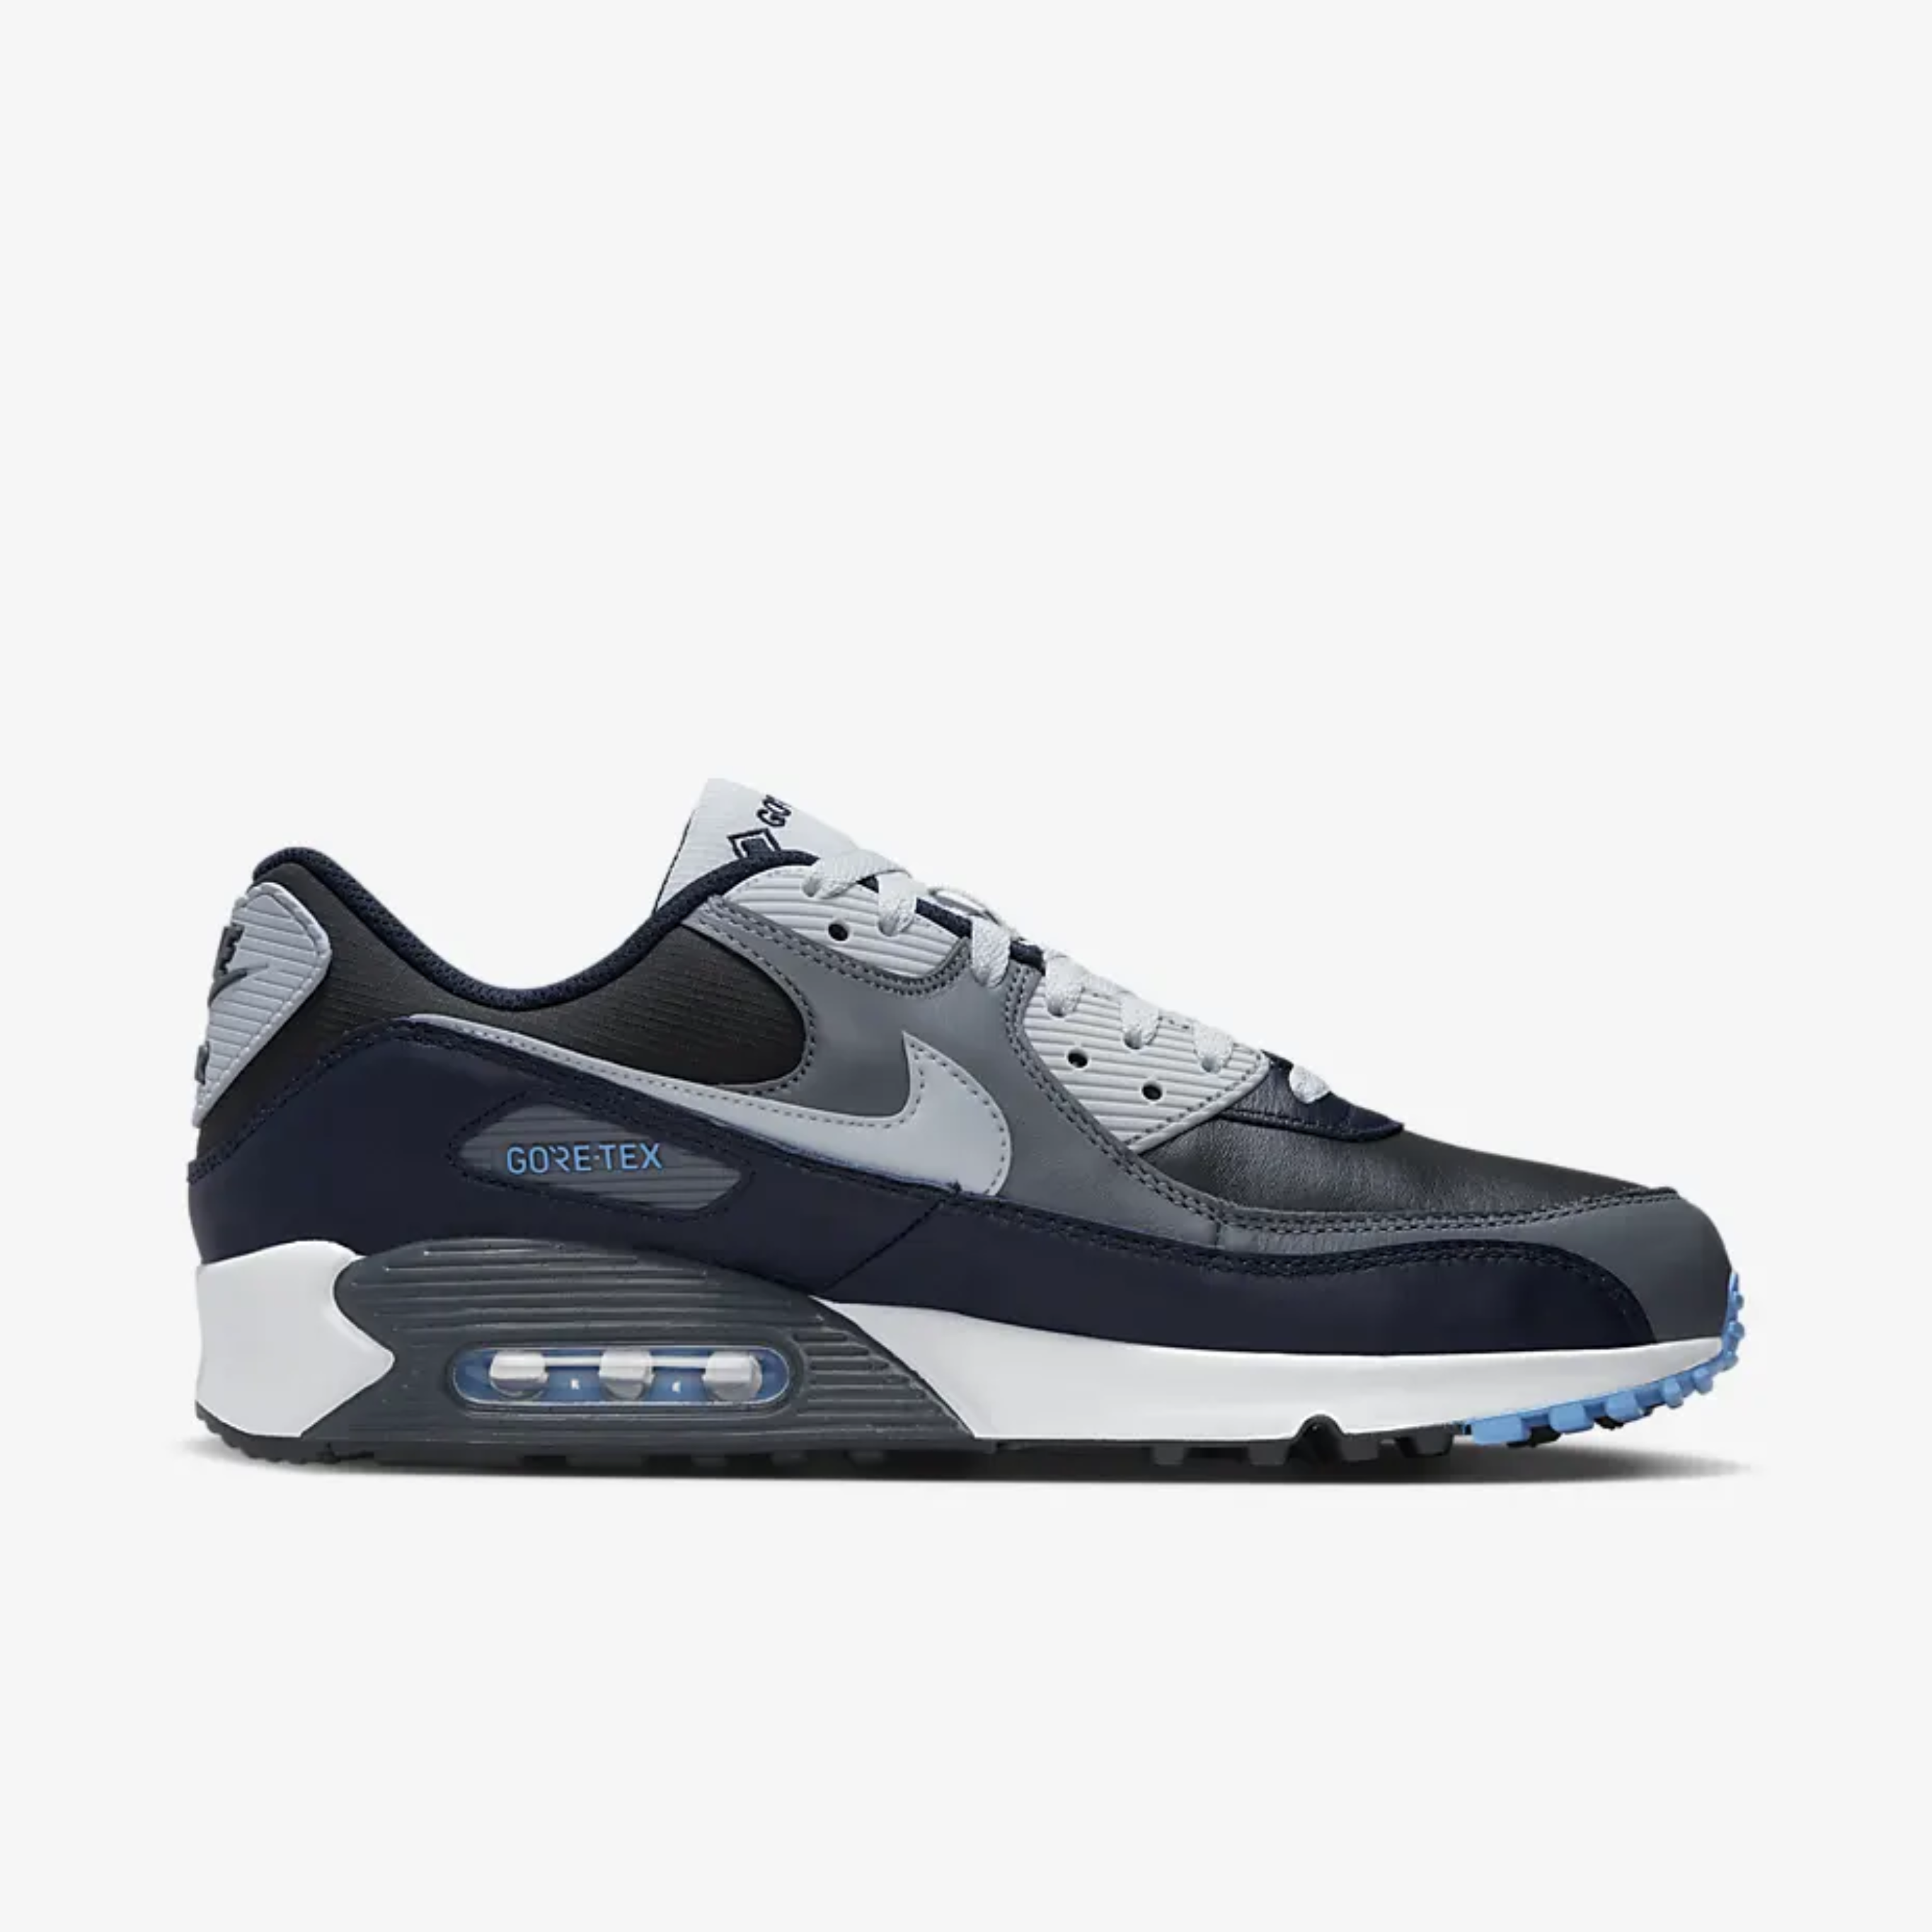 Stay dry, stay stylish: Nike Air Max 90 GTX - the ultimate